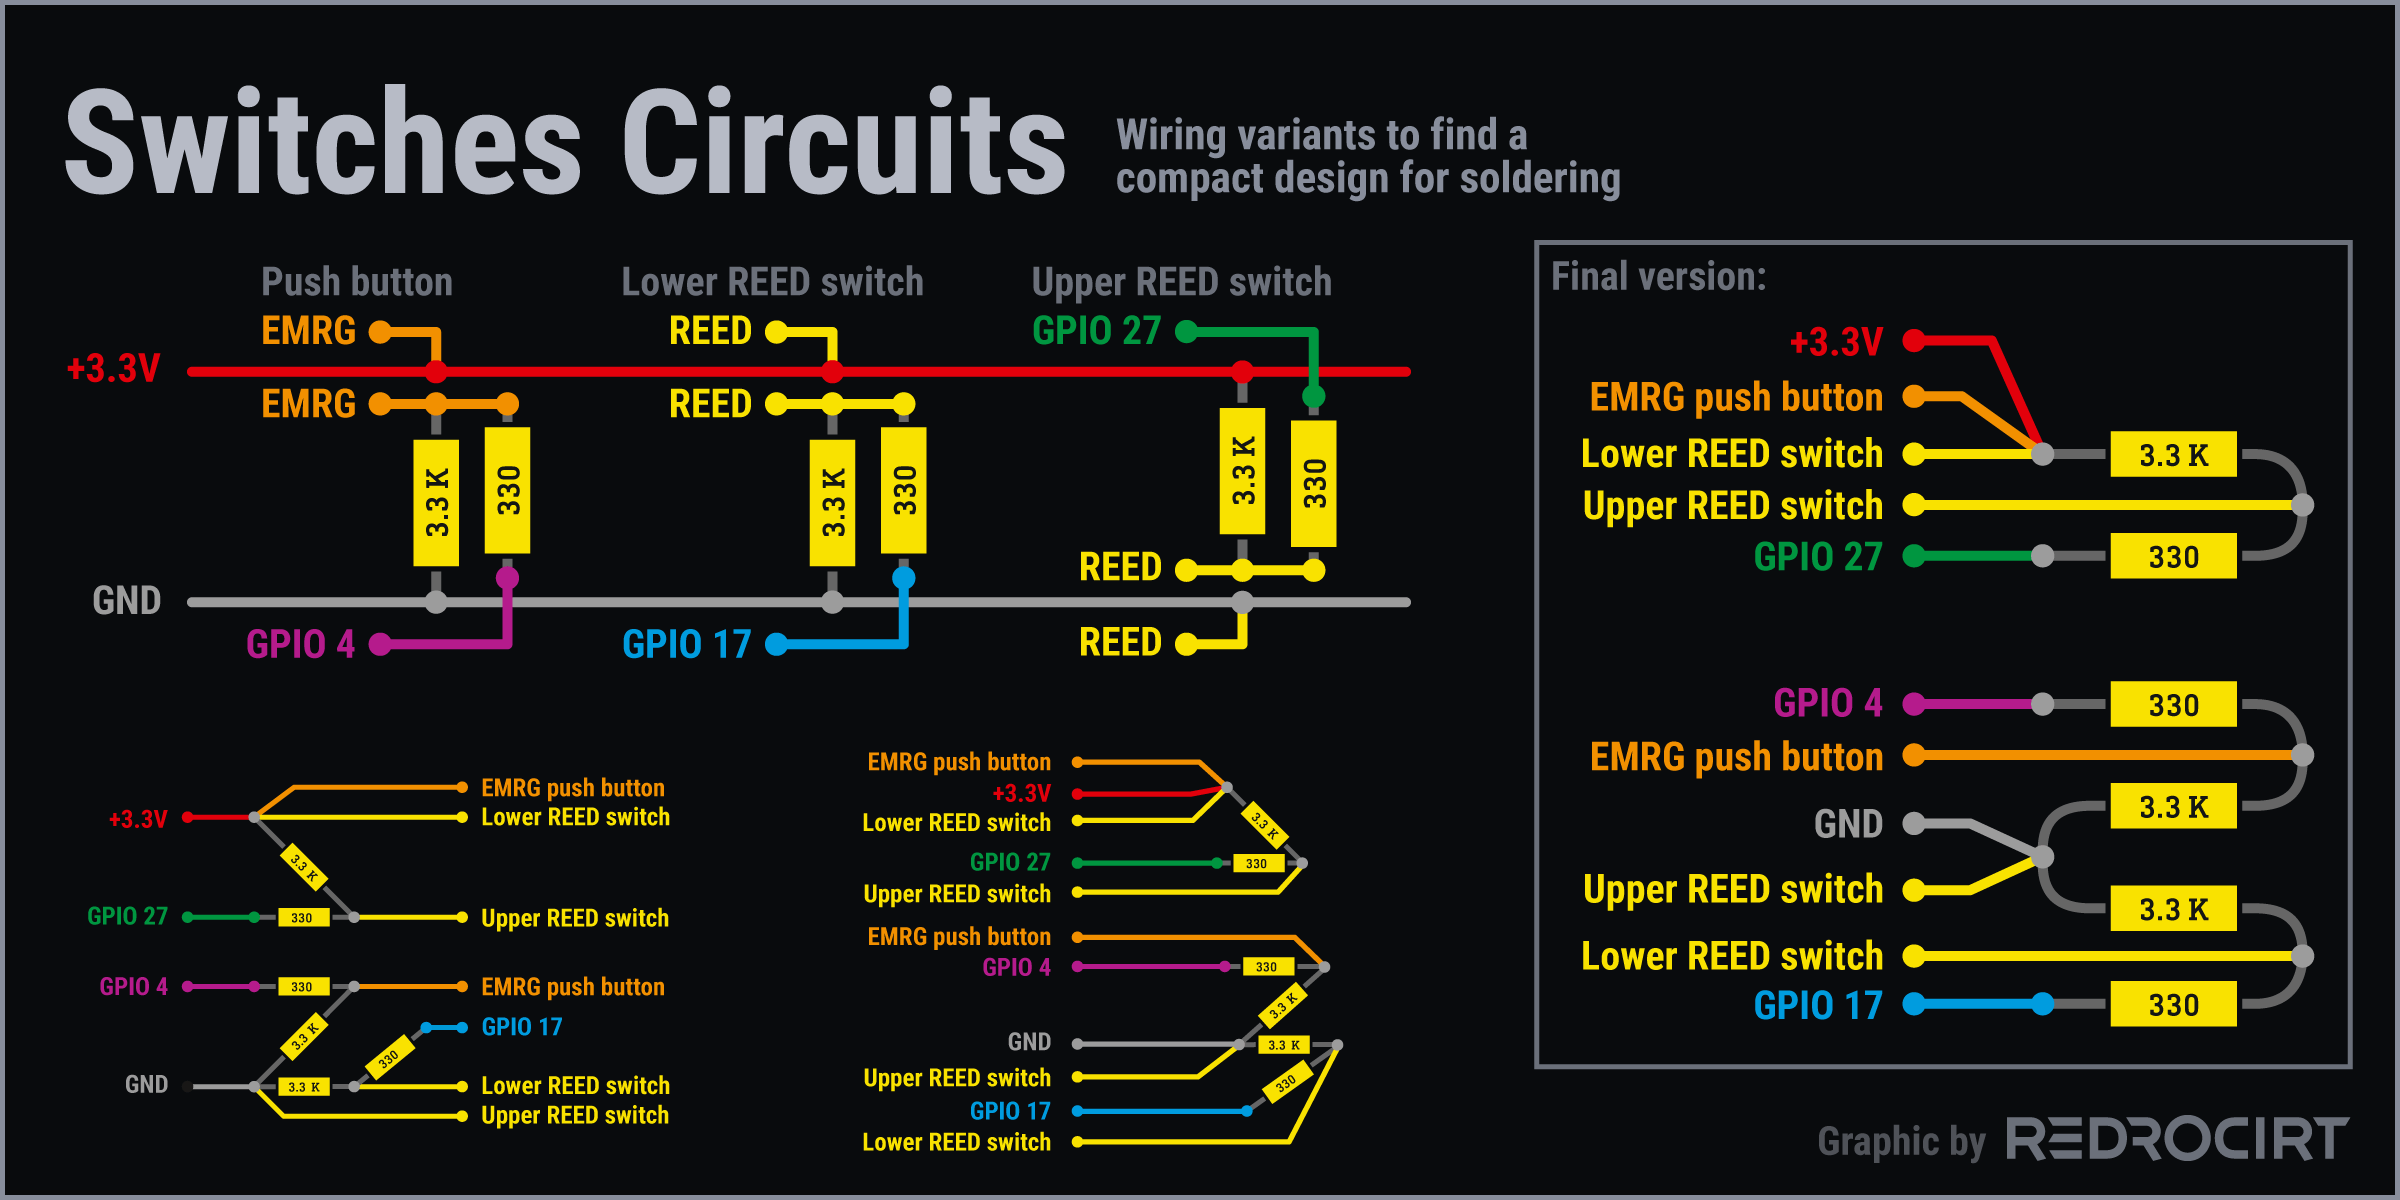 Switches circuits